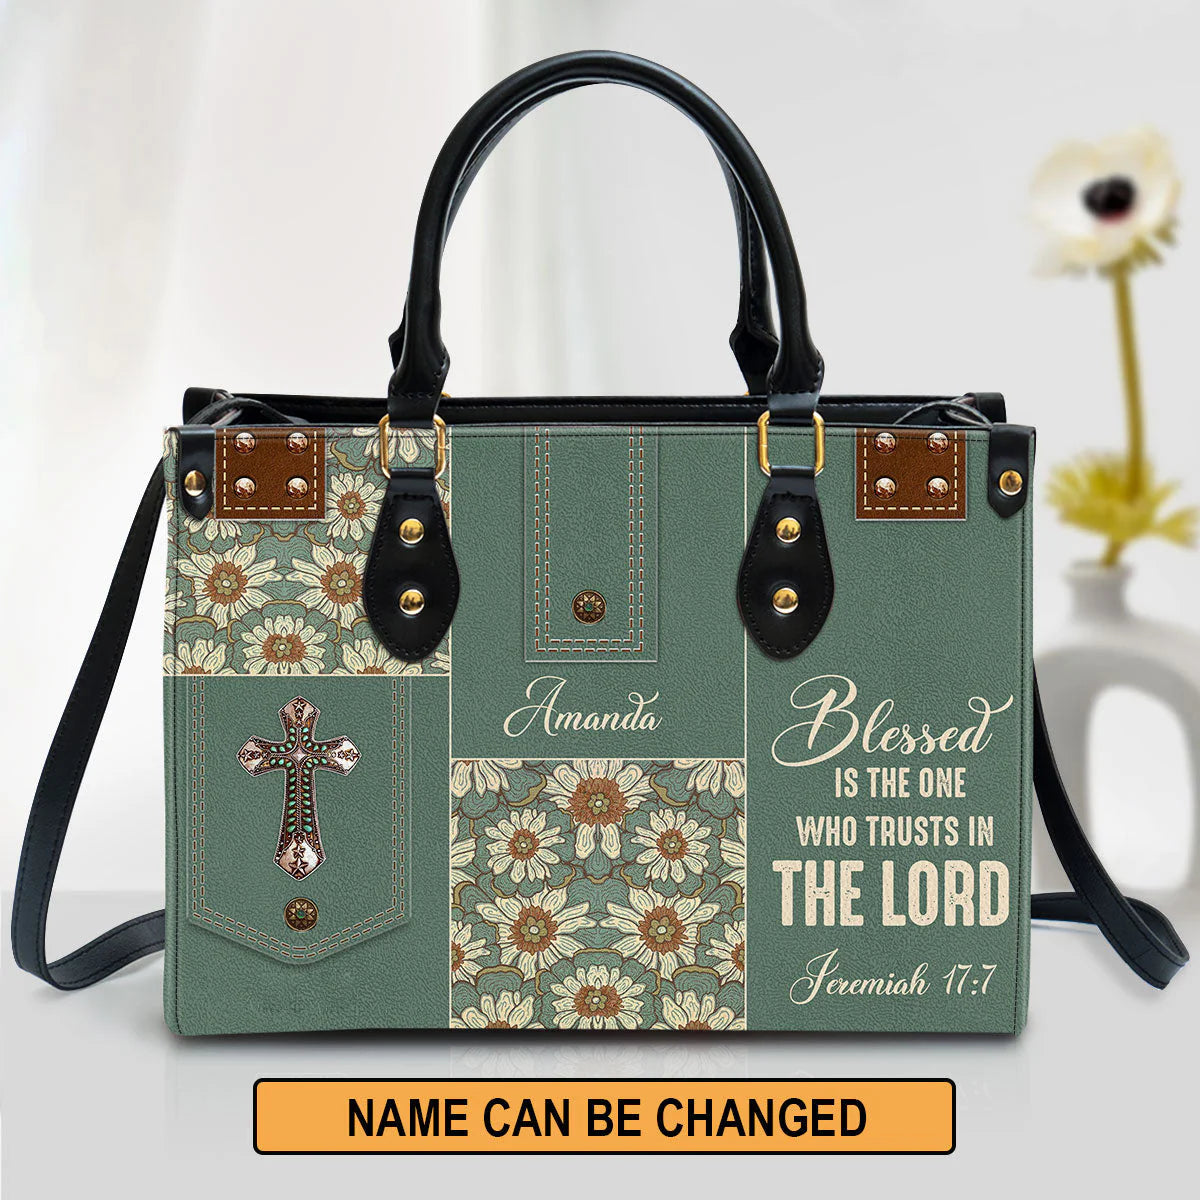 Christianartbag Handbag, Blessed Is The One Who Trusts In The Lord, Personalized Gifts, Gifts for Women, Christmas Gift. - Christian Art Bag